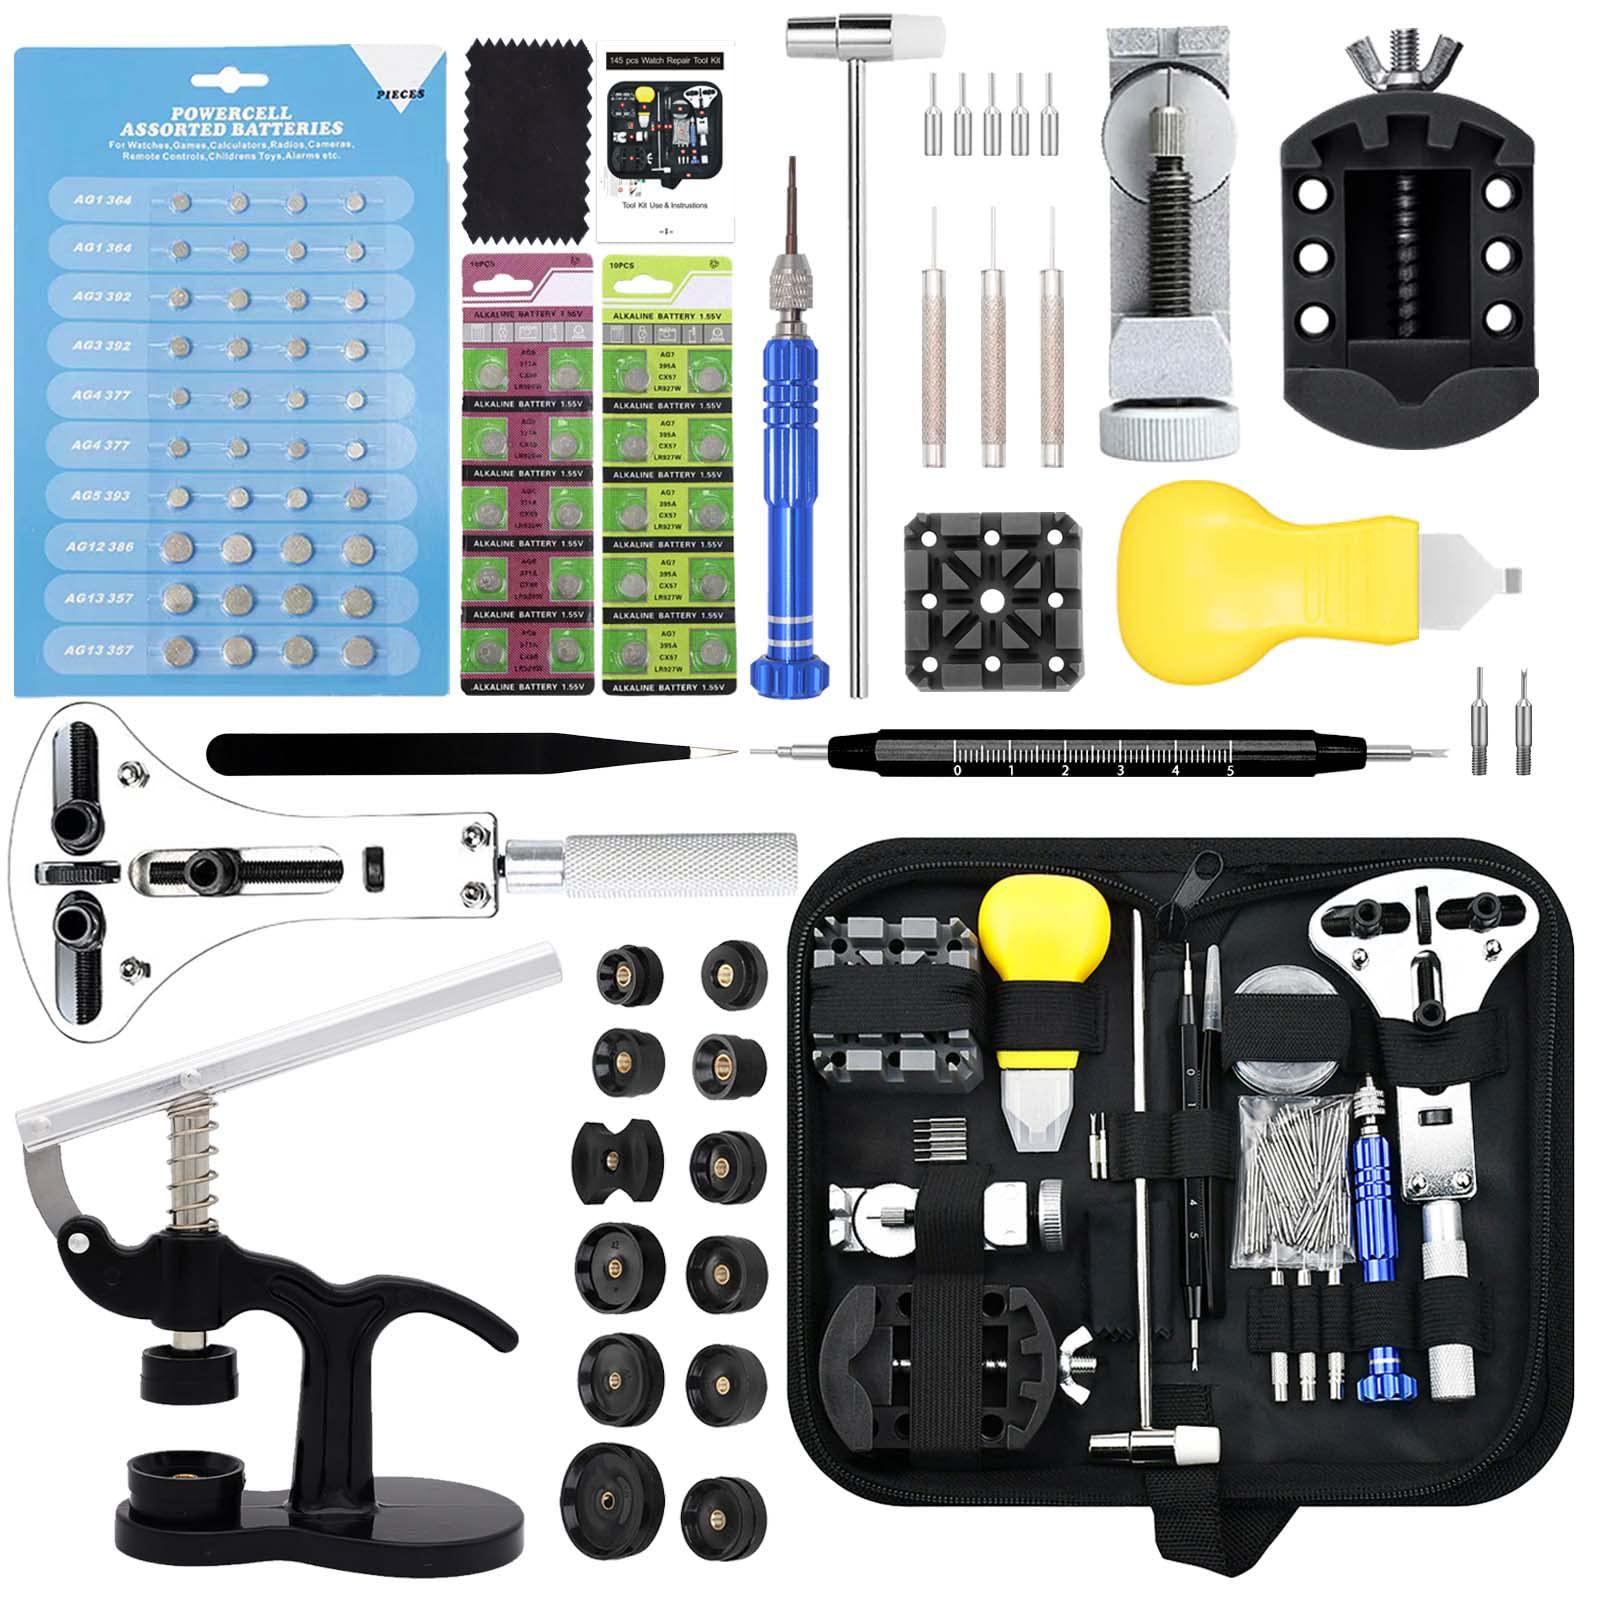 gldcapa watch repair kit, gldcapa professional watch battery replacement kit, watch repair tools with carrying case, watch link remov